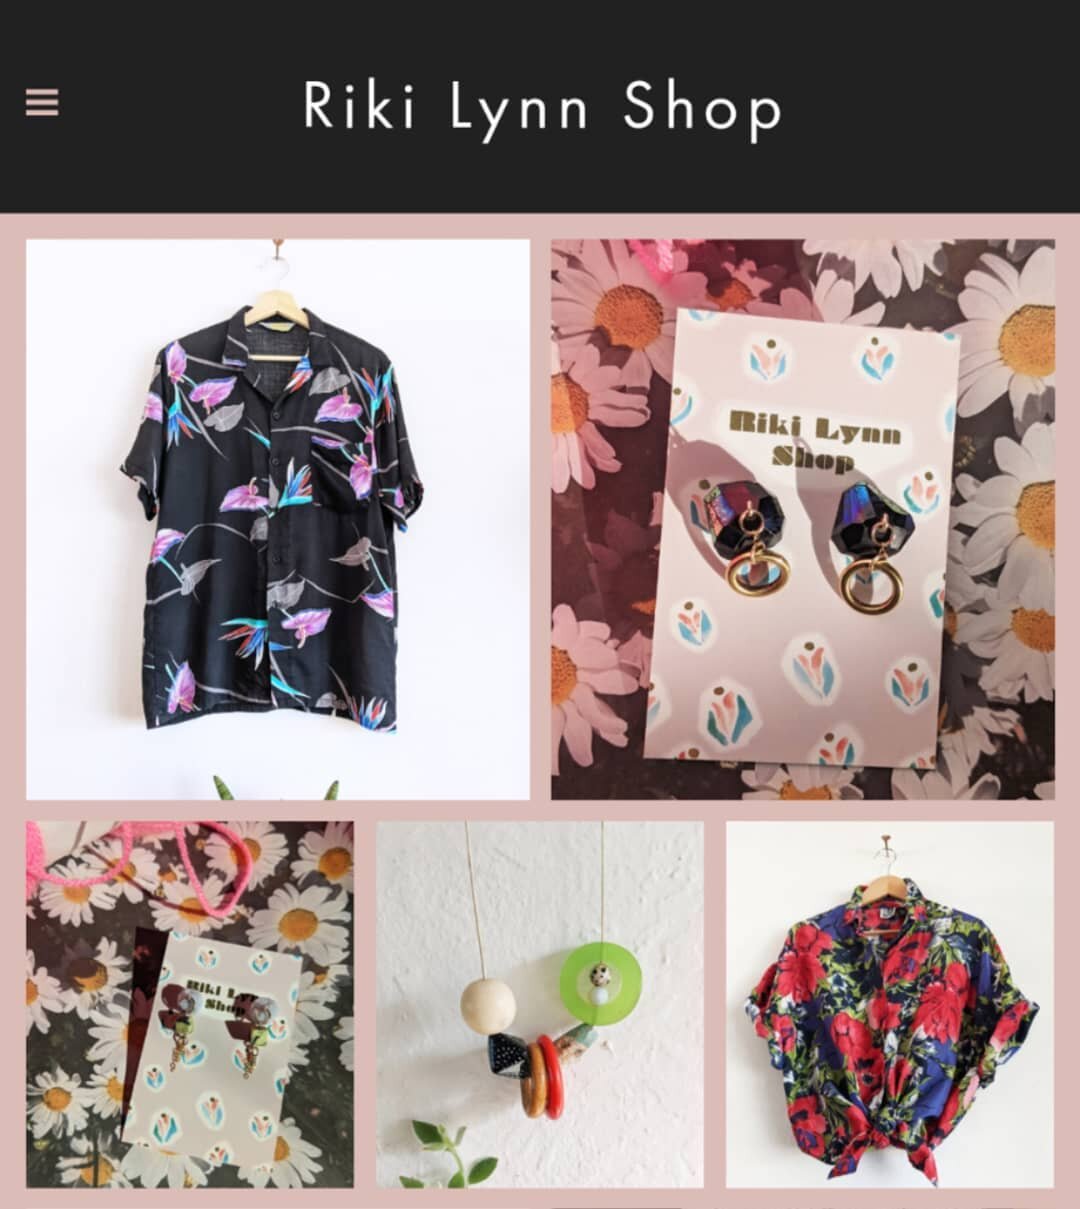 🌺🍹Featuring real Cocktail-y vibes over here in the shop this weekend 🍹🌺

Check out what else is fresh and new. Link in bio.

xo🌼 rikilynnshop

#rikilynnshop #rikilynngift #rikilynnflea #rikilynnstyle #newearrings #gemstonejewelry #handmadejewelr